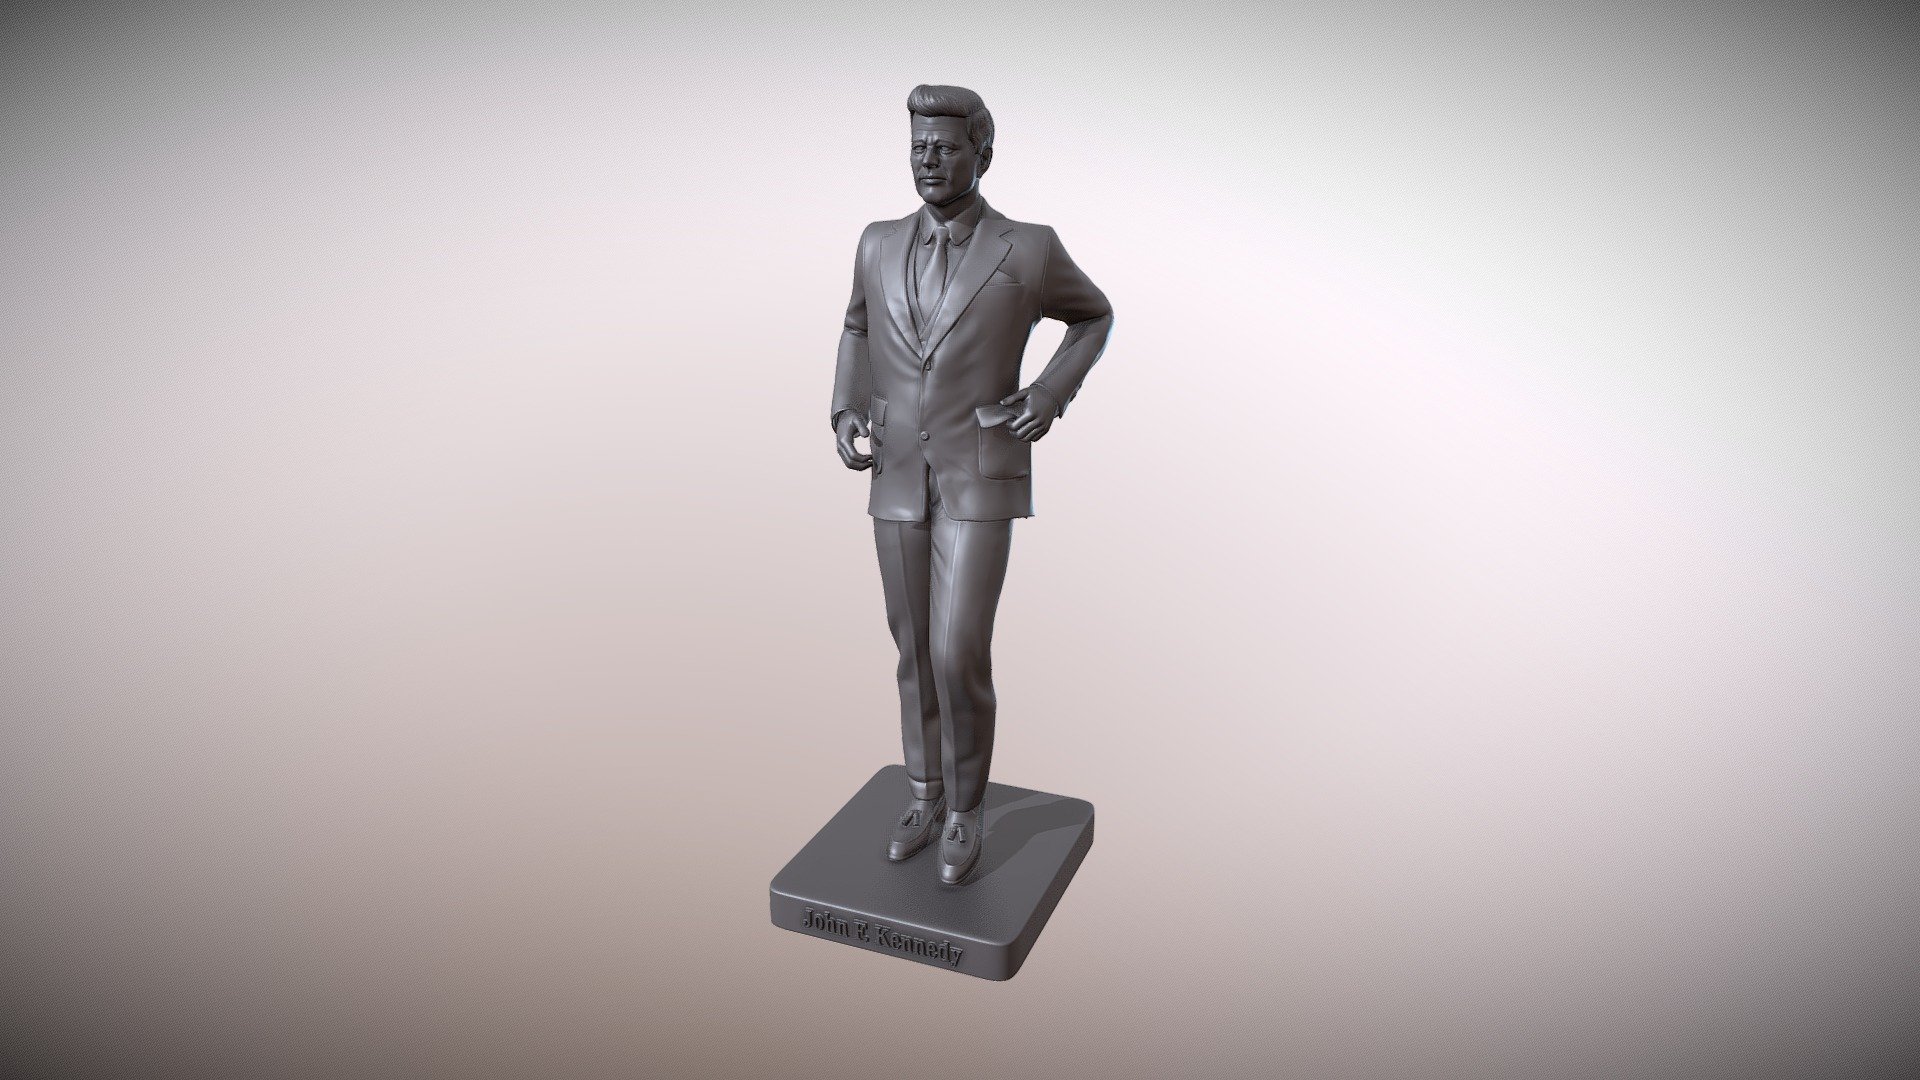 3d model of the statue of John F. Kennedy for 3D printing, the model is provided in one piece and separated into parts for easier printing 3d model